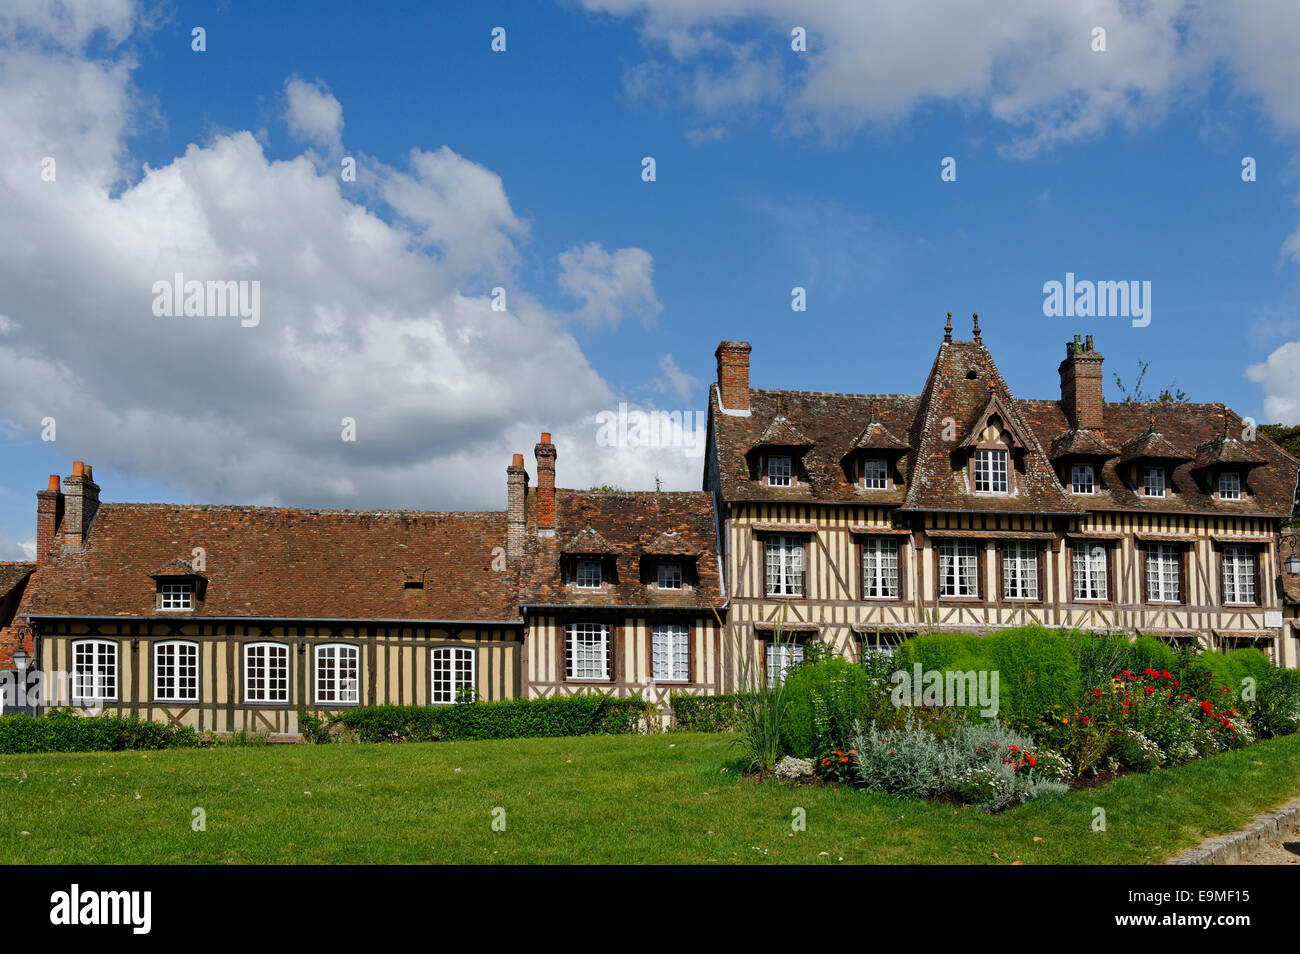 Timber Frame House Maurice Ravel Impressionist Musician Lyons Foret Eure  Stock Photo by ©hzparisien@gmail.com 211629332